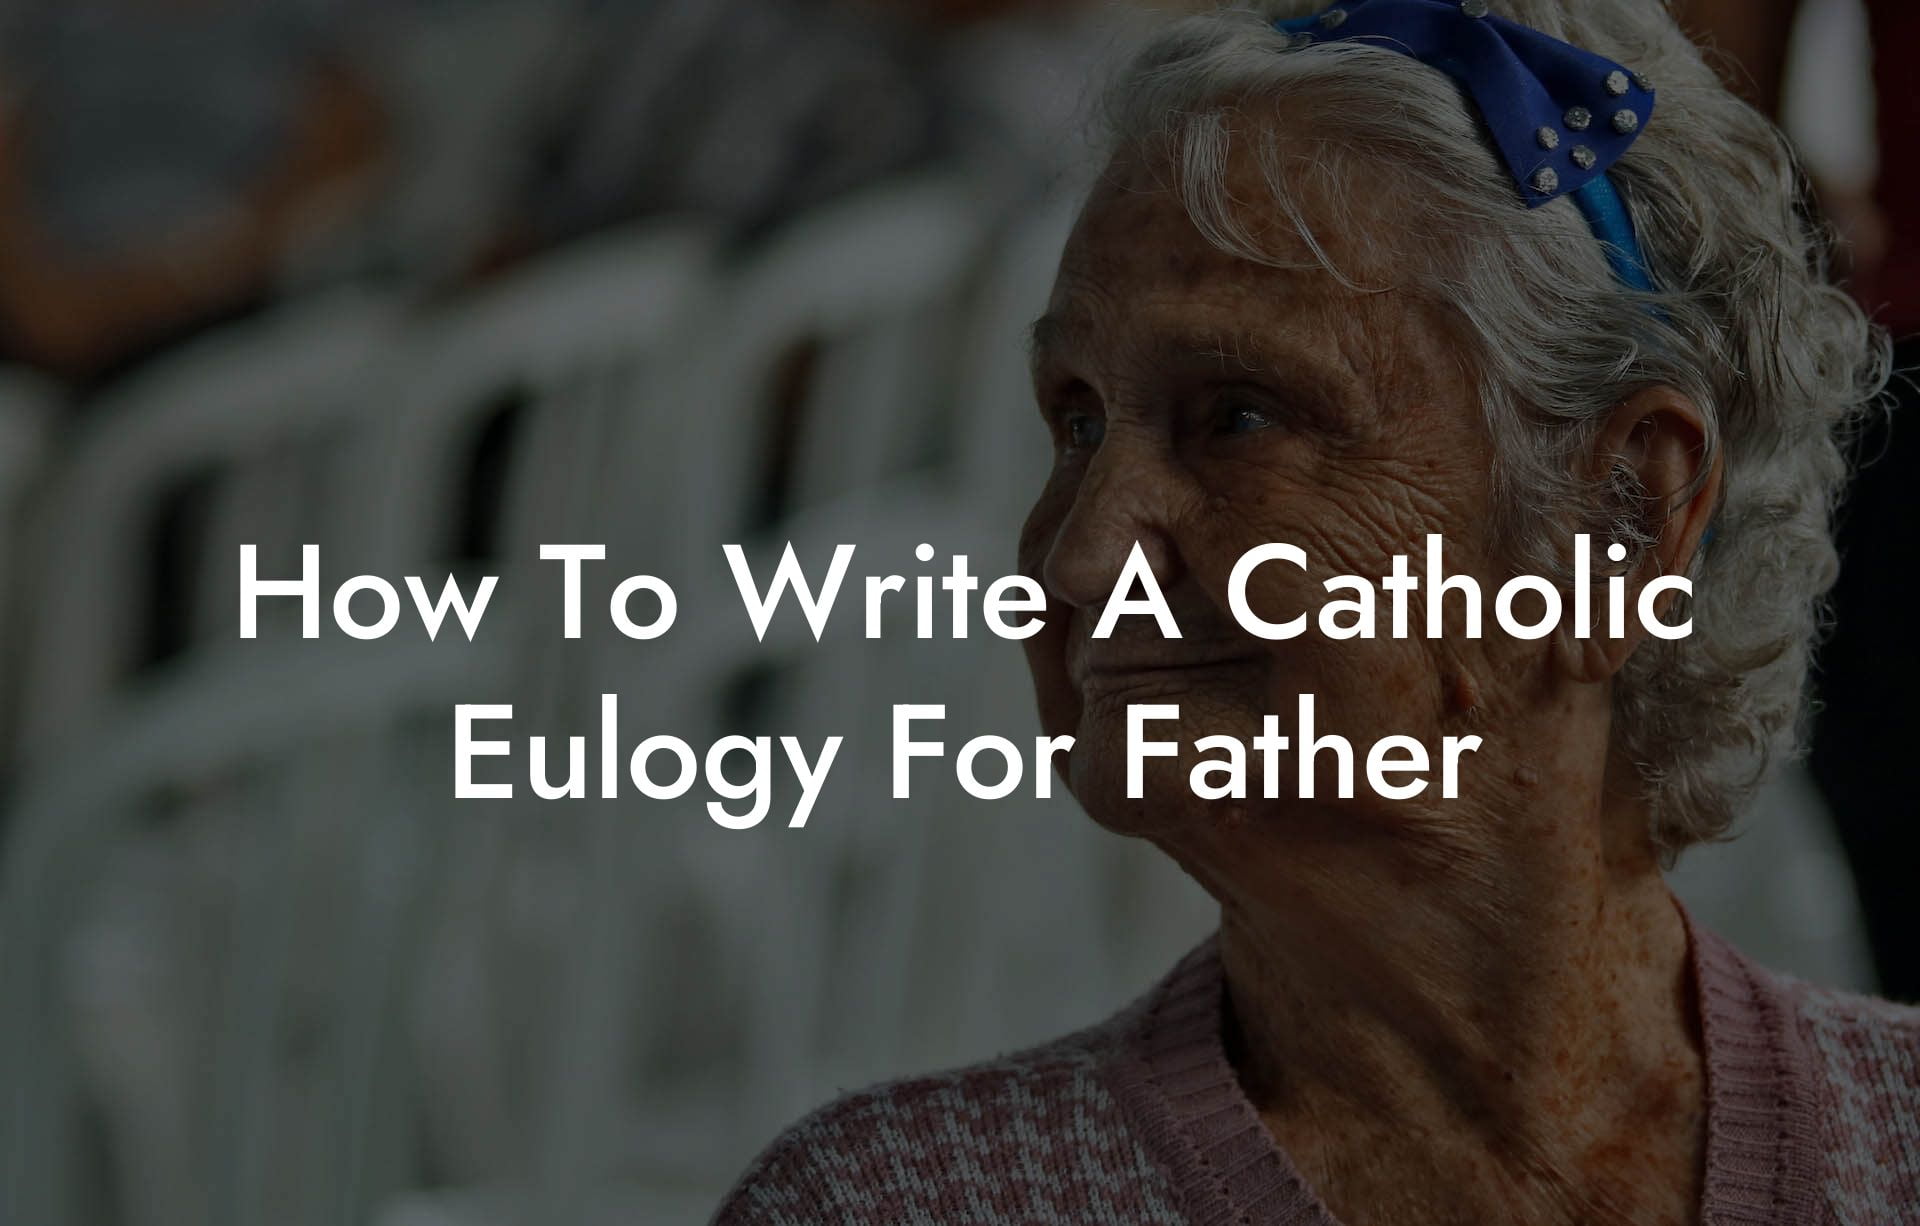 How To Write A Catholic Eulogy For Father